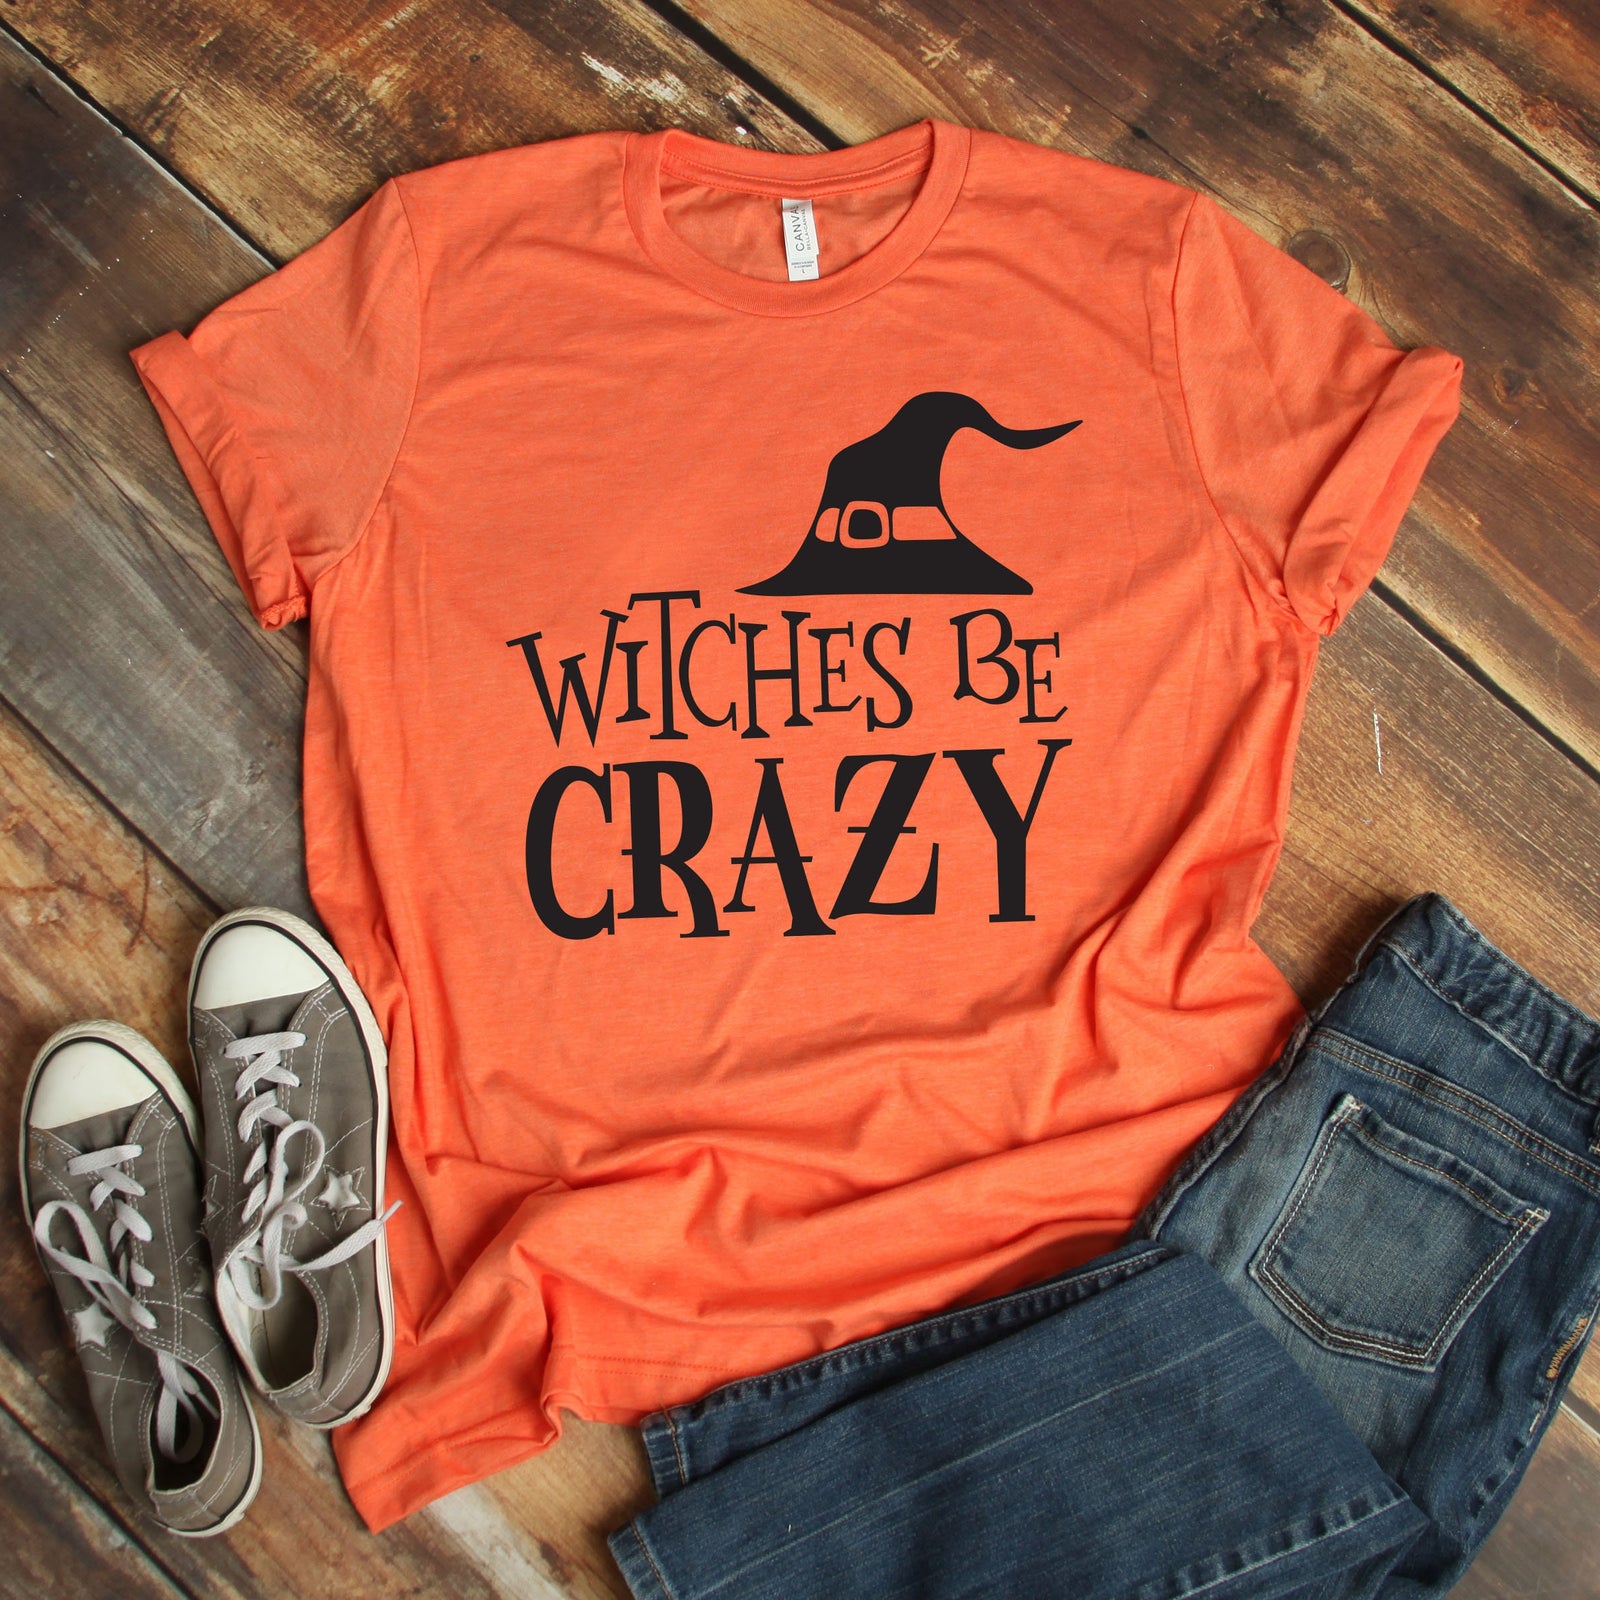 Witches Be Crazy - Happy Halloween Adult T Shirt - Halloween - Funny T Shirt